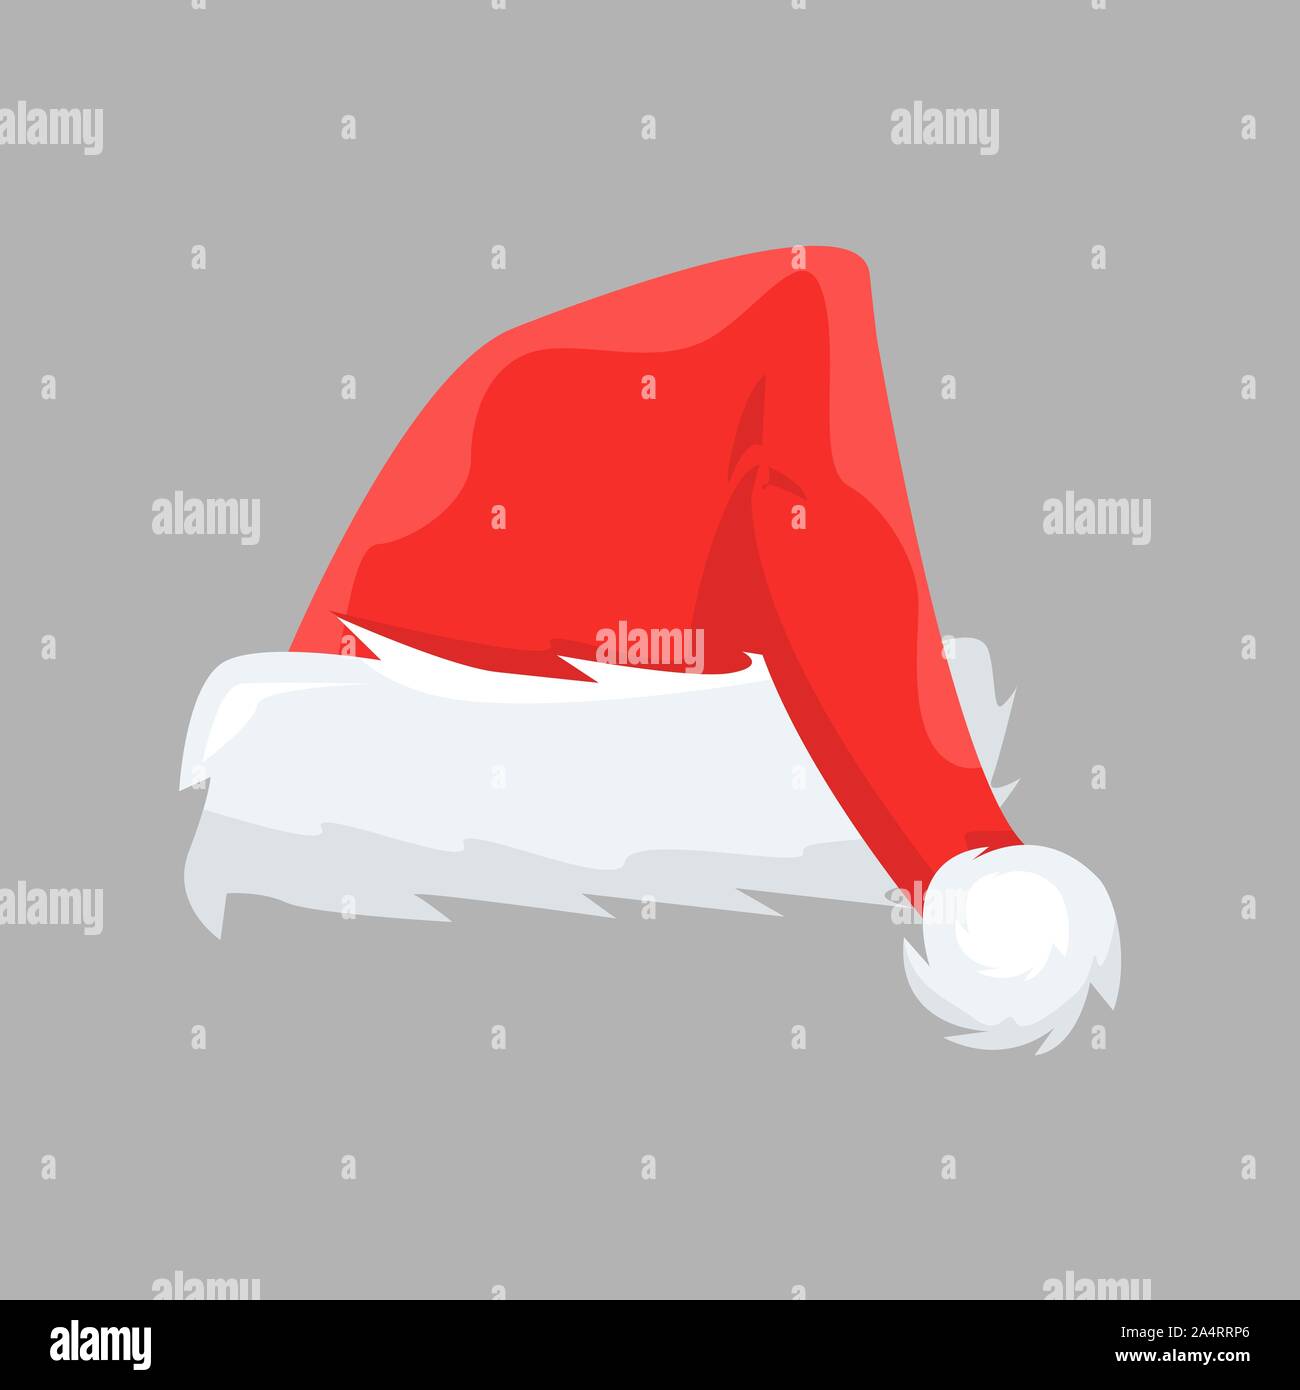 Santa Claus cap with cartoon style. Flat and solid color vector illustration. Stock Vector